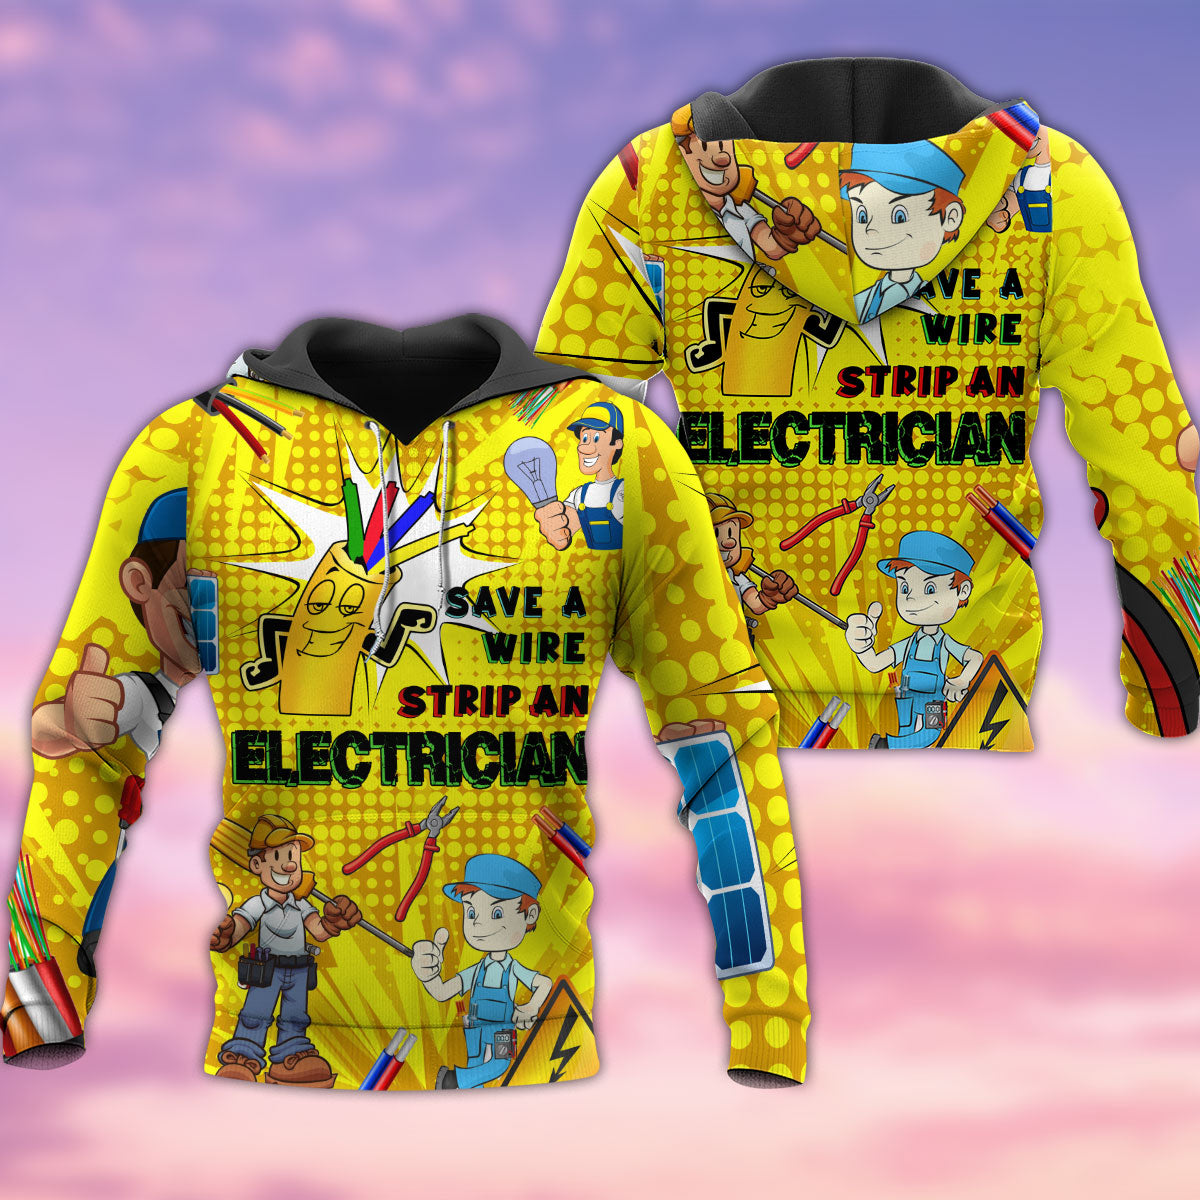 Electrician Save A Wire Strip An Electrician With Yellow Style - Hoodie - Owls Matrix LTD